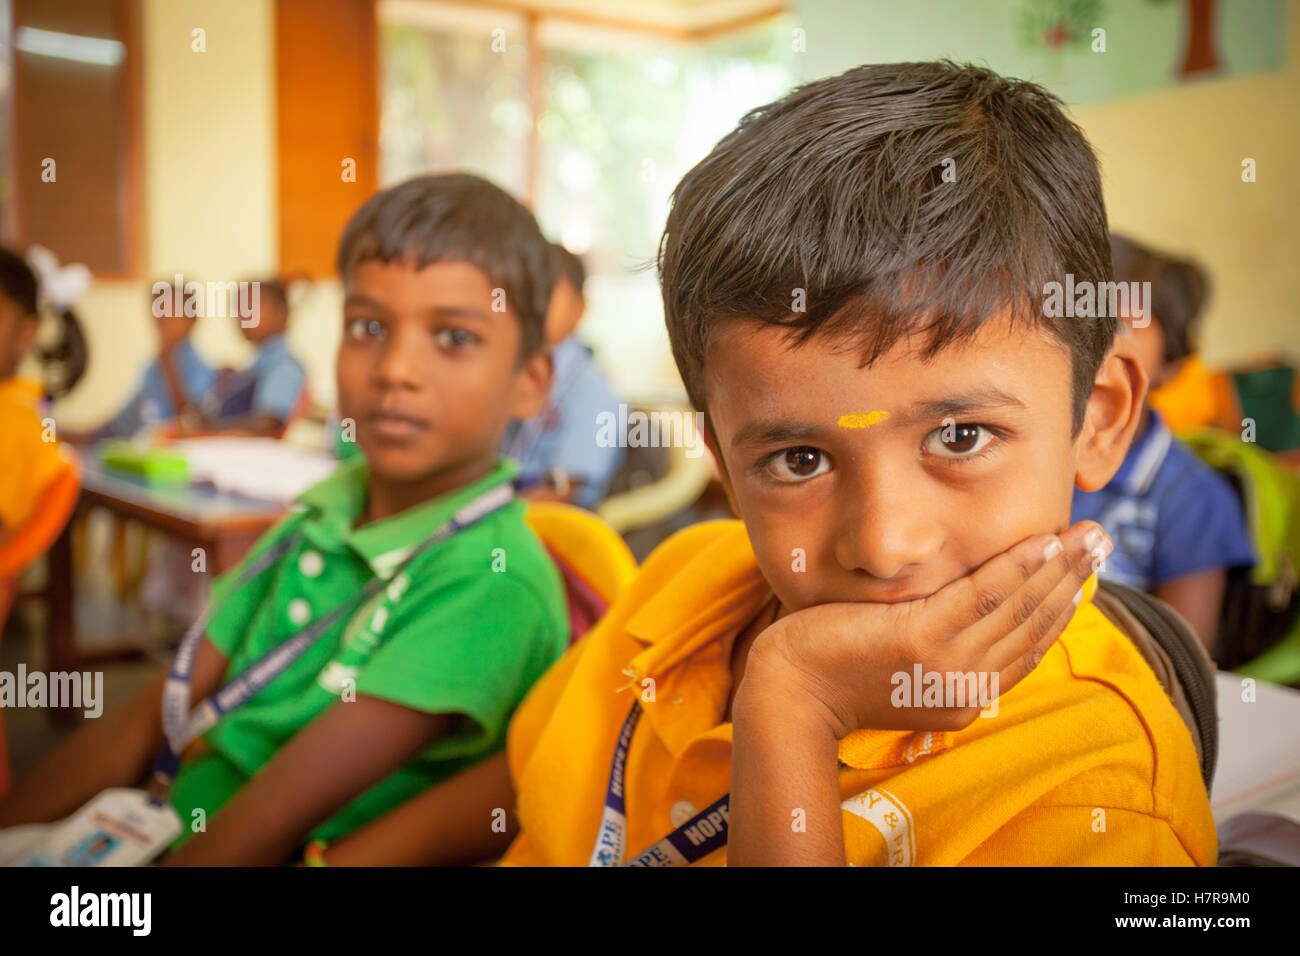 Young primary or elementary school children sitting at their desks in a classroom, The Hope Foundation School, India Stock Photo